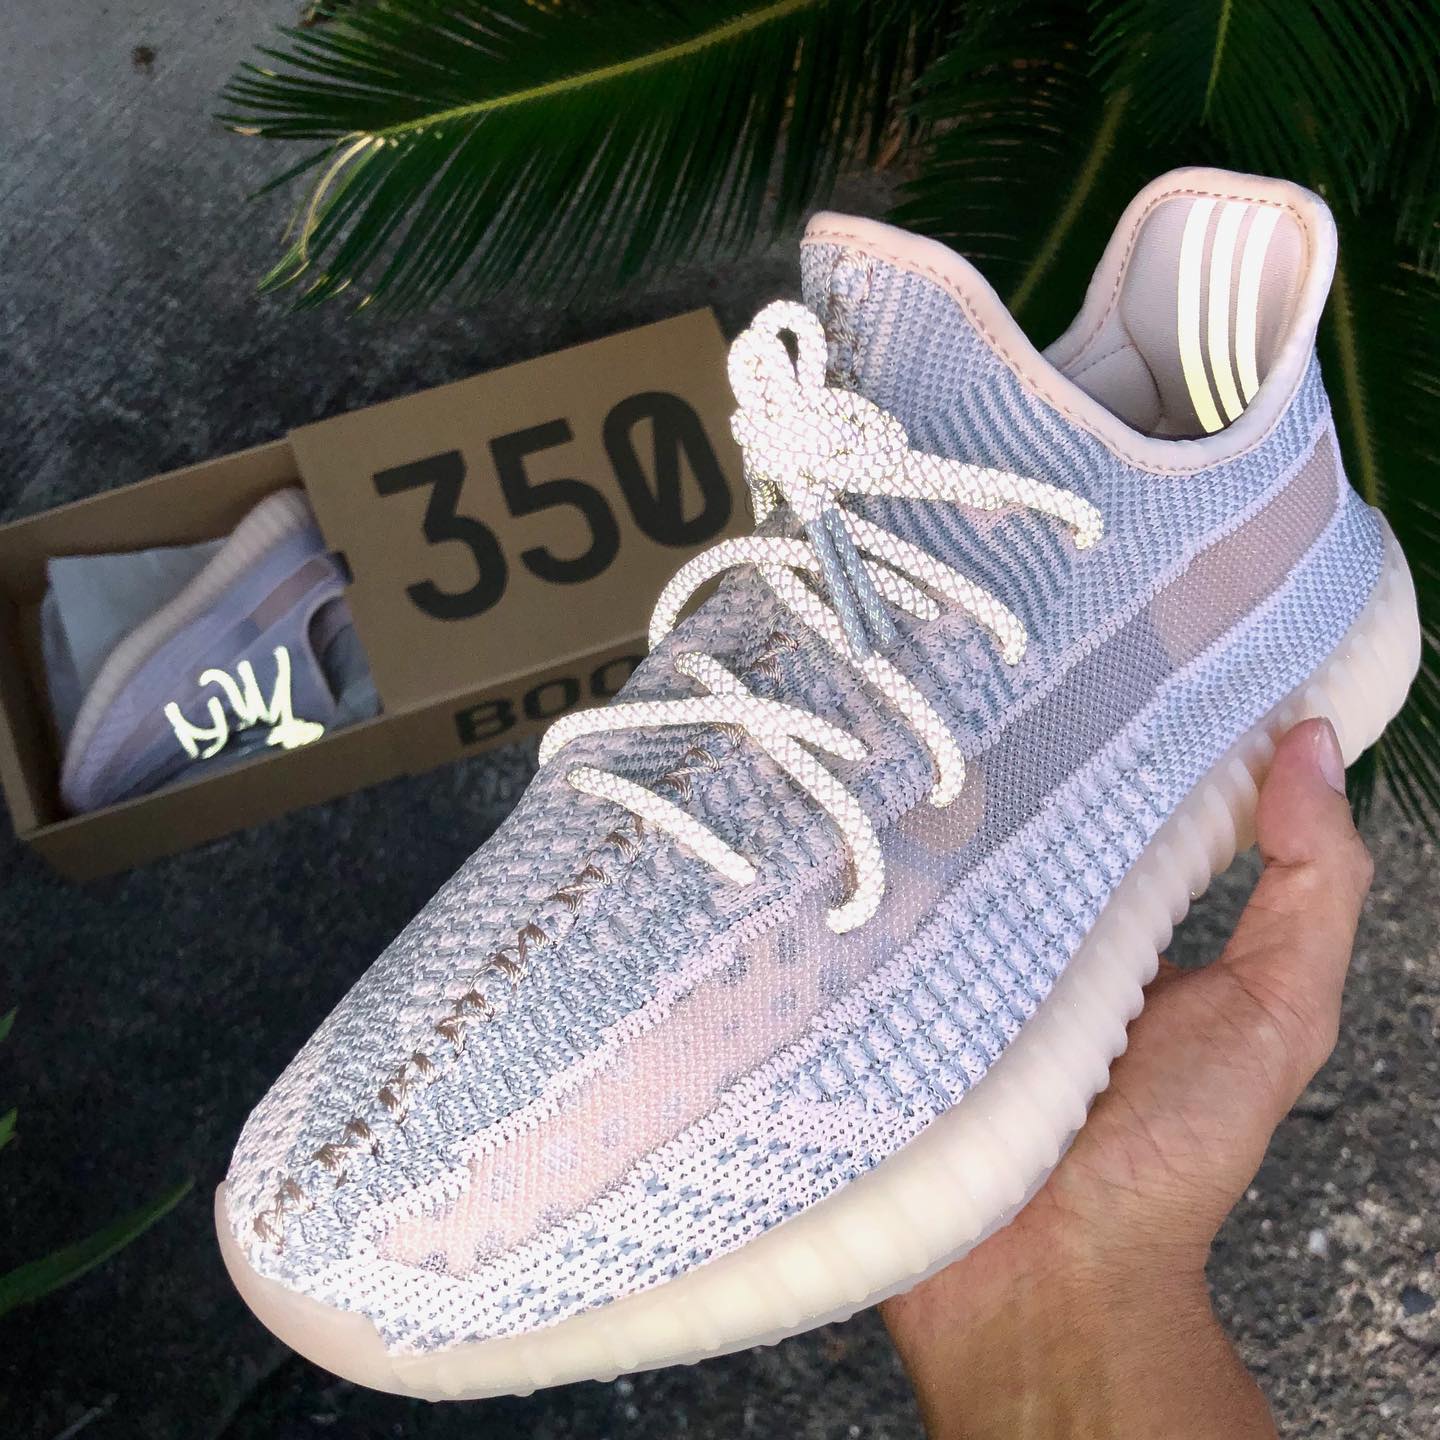 Adidas Yeezy Boost 350 V2 Synth Sneakers Shoes